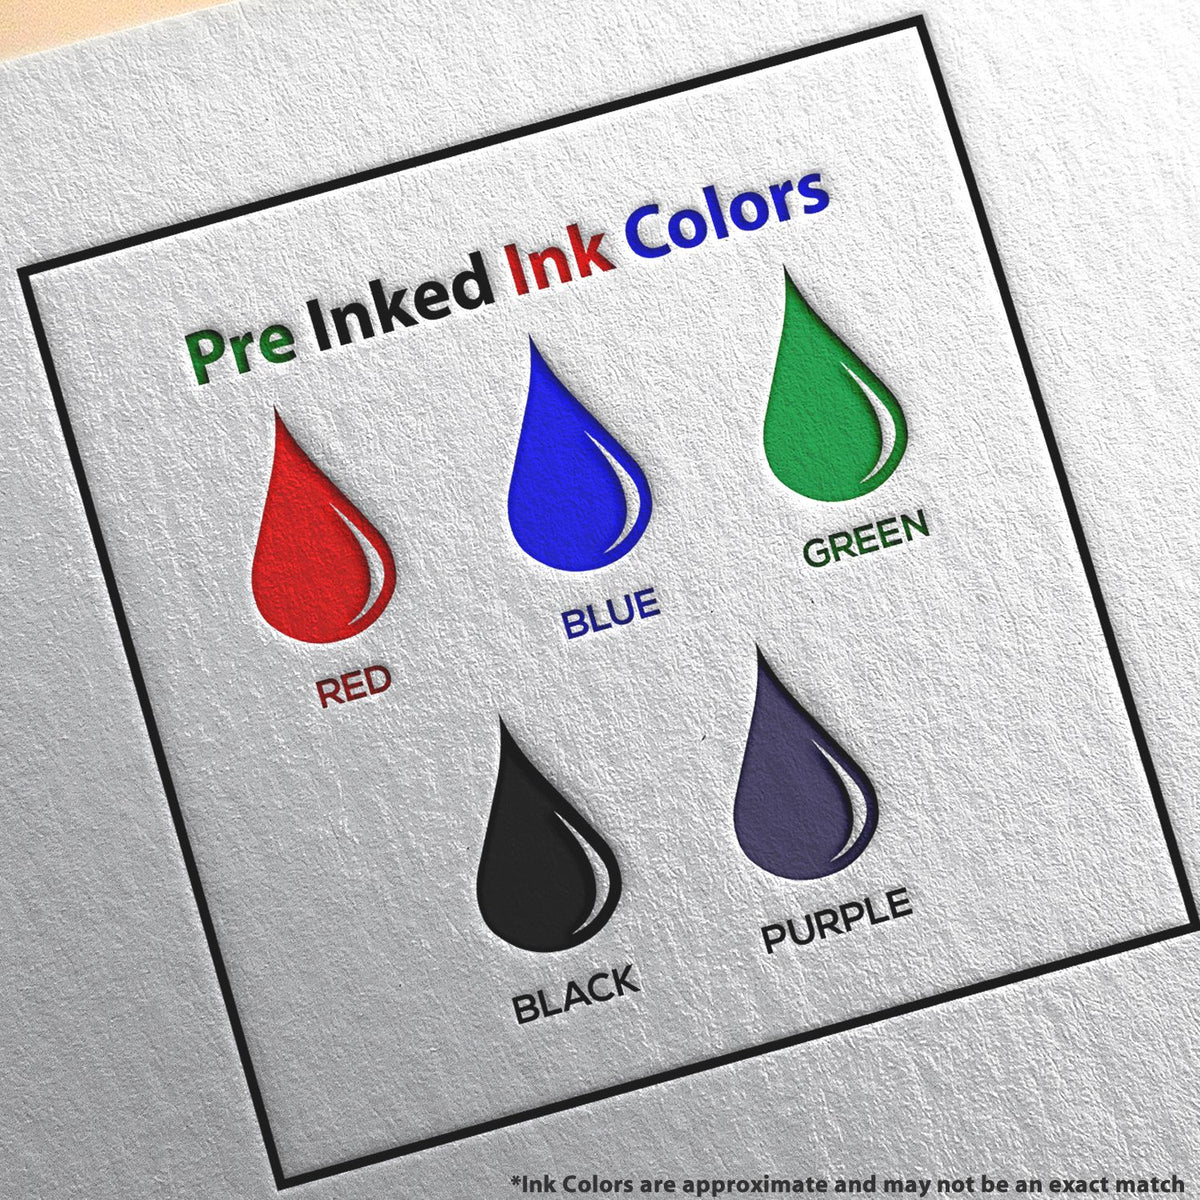 A picture showing the different ink colors or hues available for the Slim Pre-Inked New Jersey Architect Seal Stamp product.